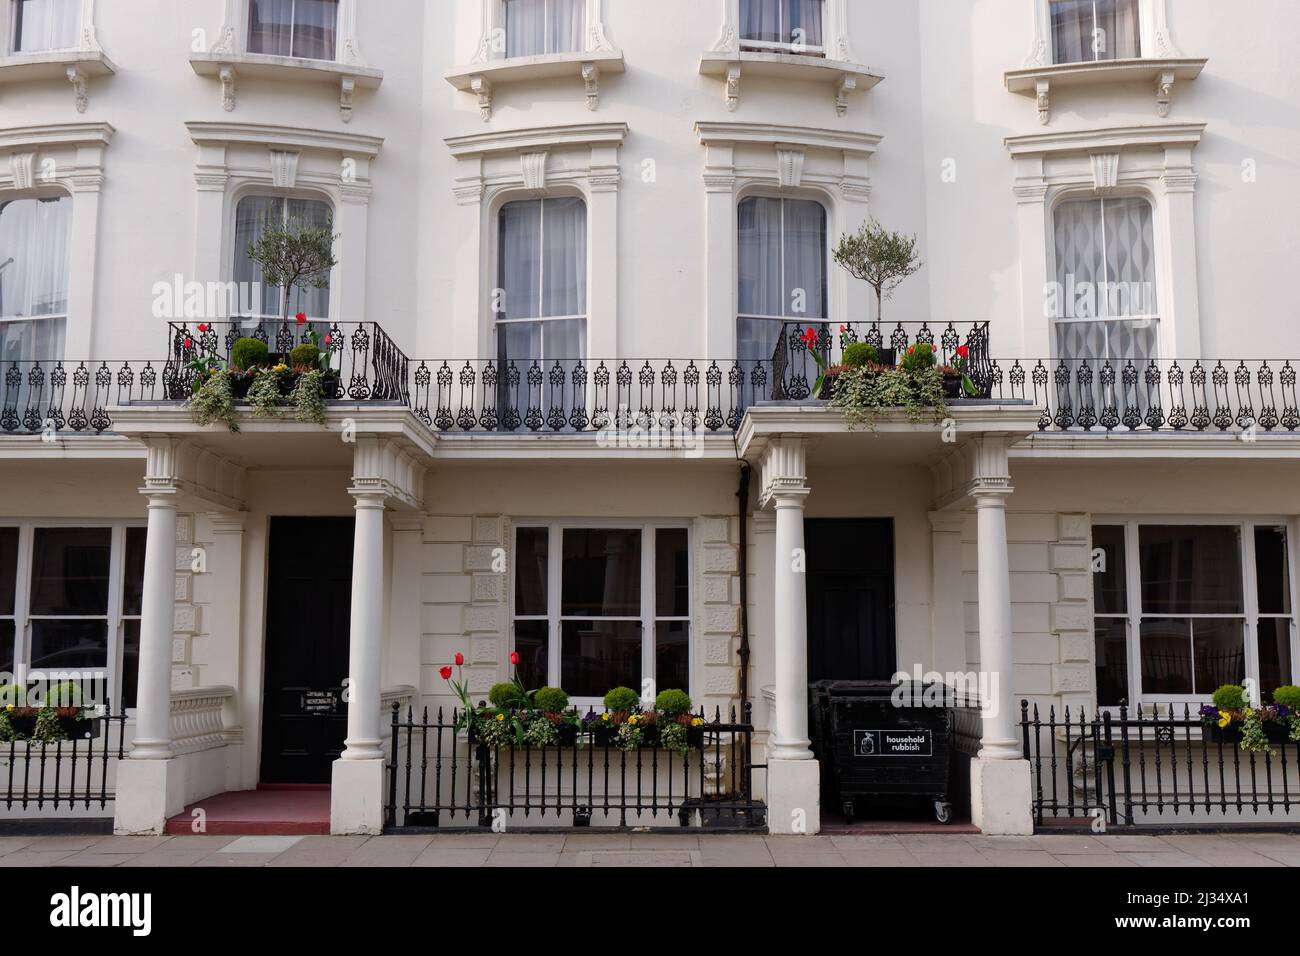 London, Greater London, England, March 29 2022: Elegant white fronted residential properties in the Bayswater area. Stock Photo